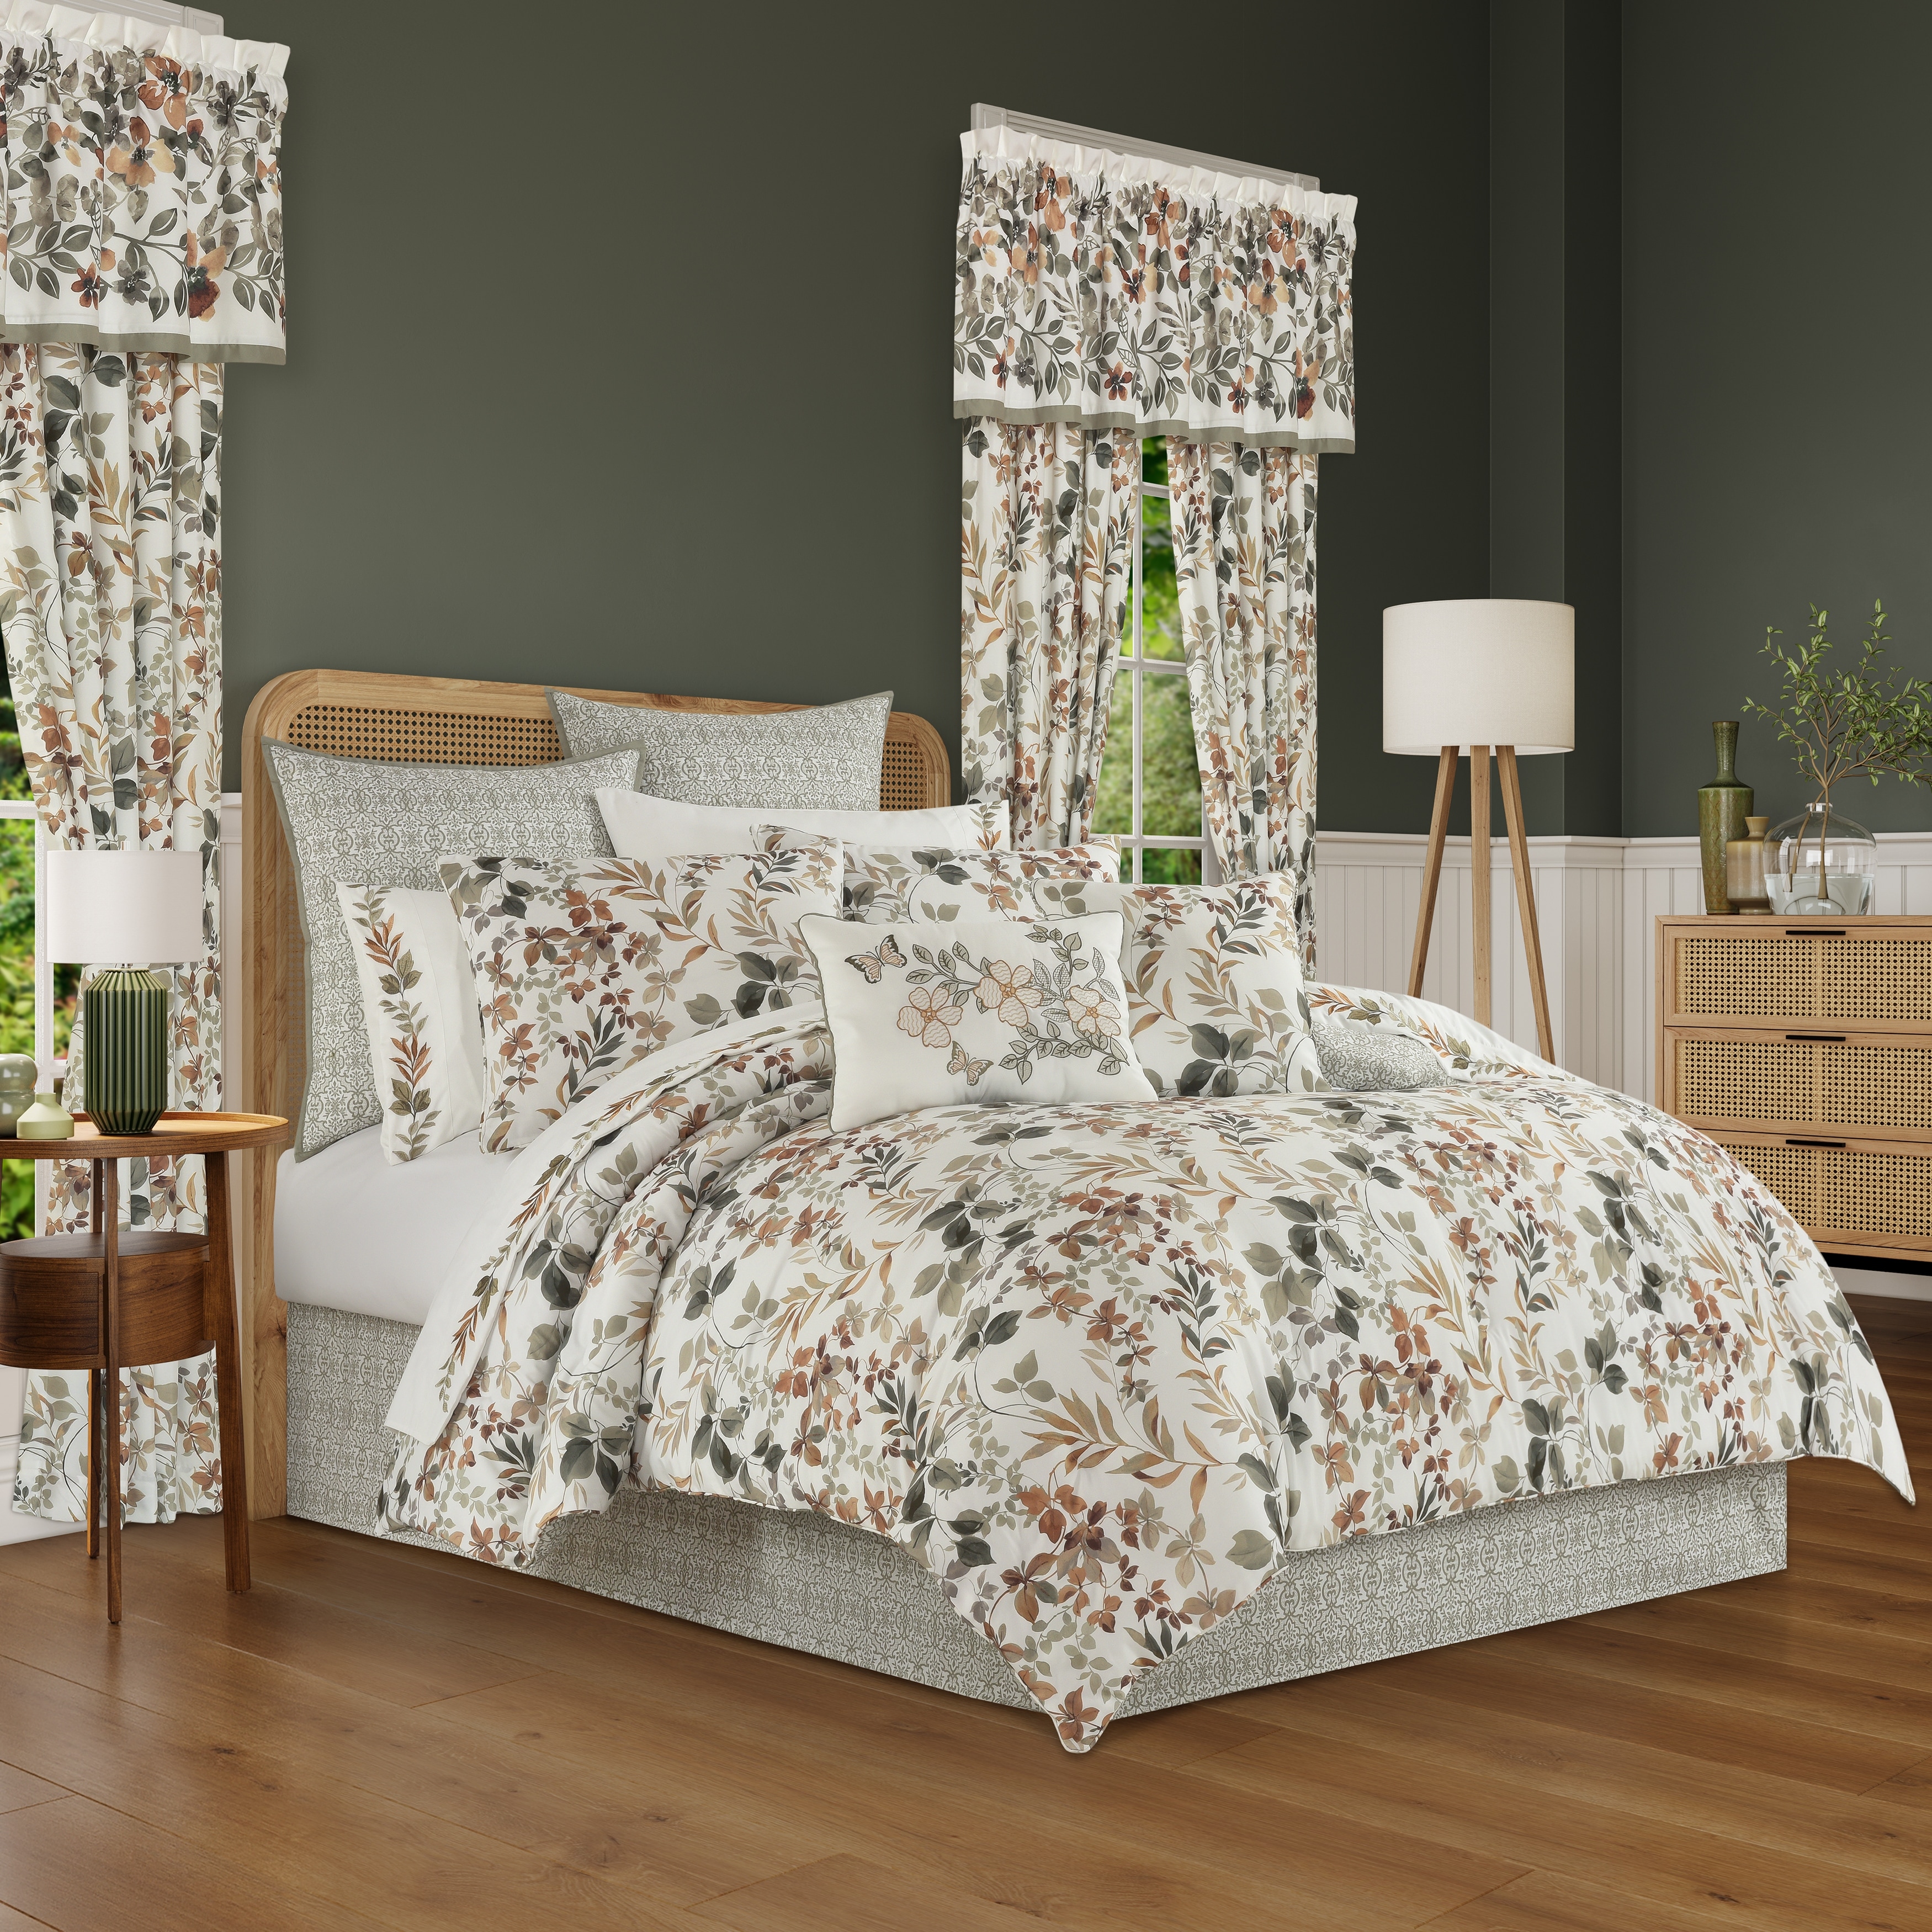 Green Floral Comforters and Sets - Bed Bath & Beyond